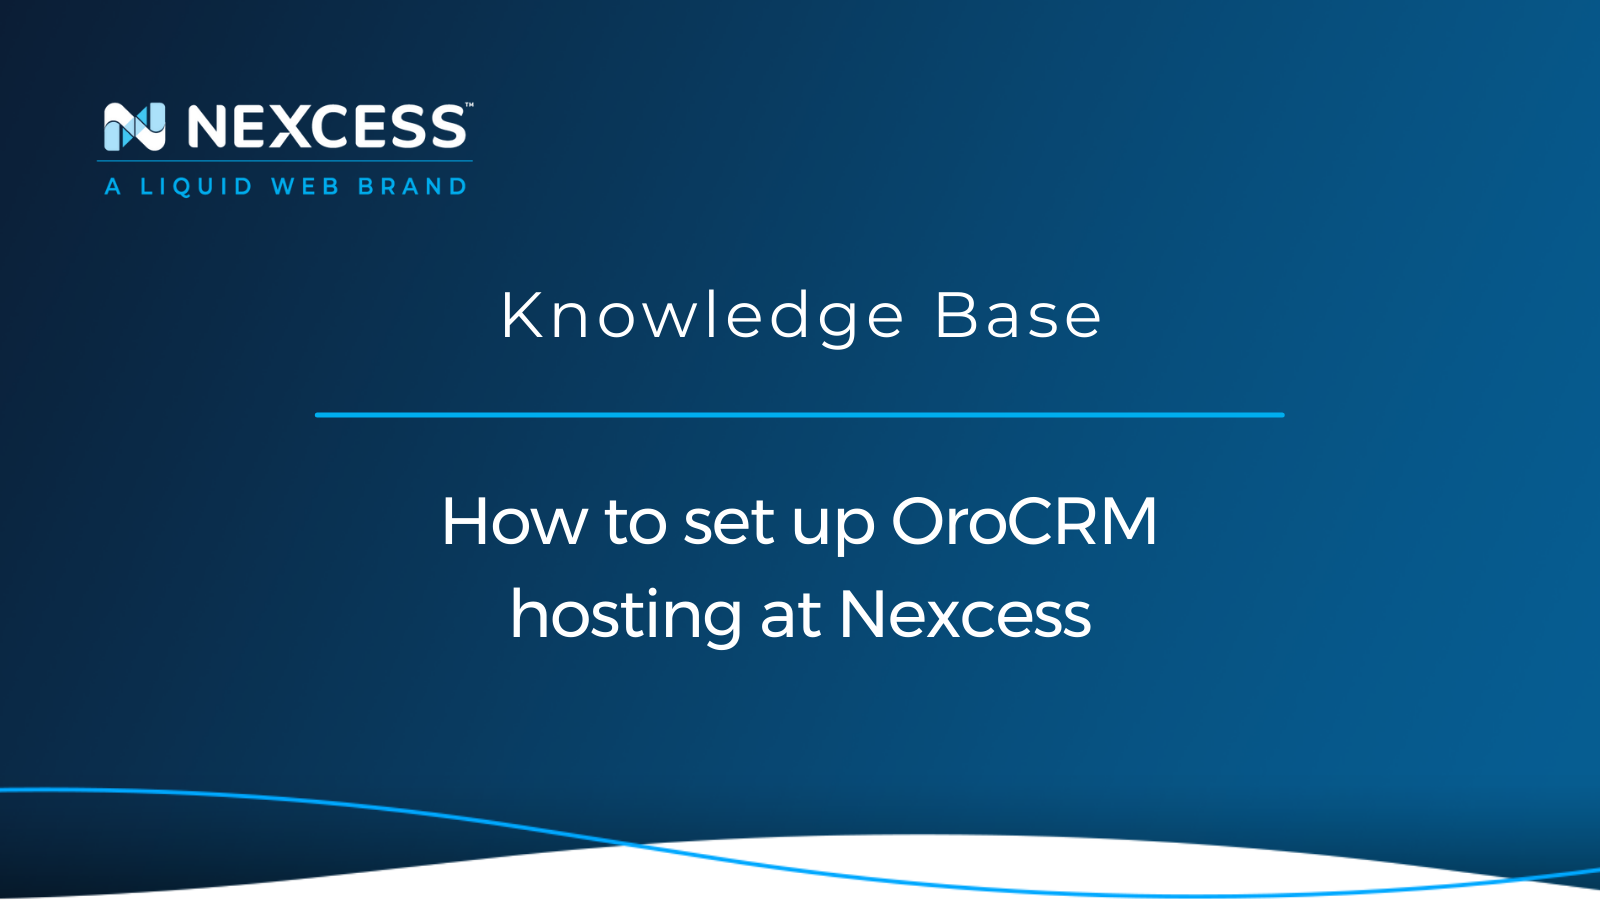 How to set up OroCRM hosting at Nexcess